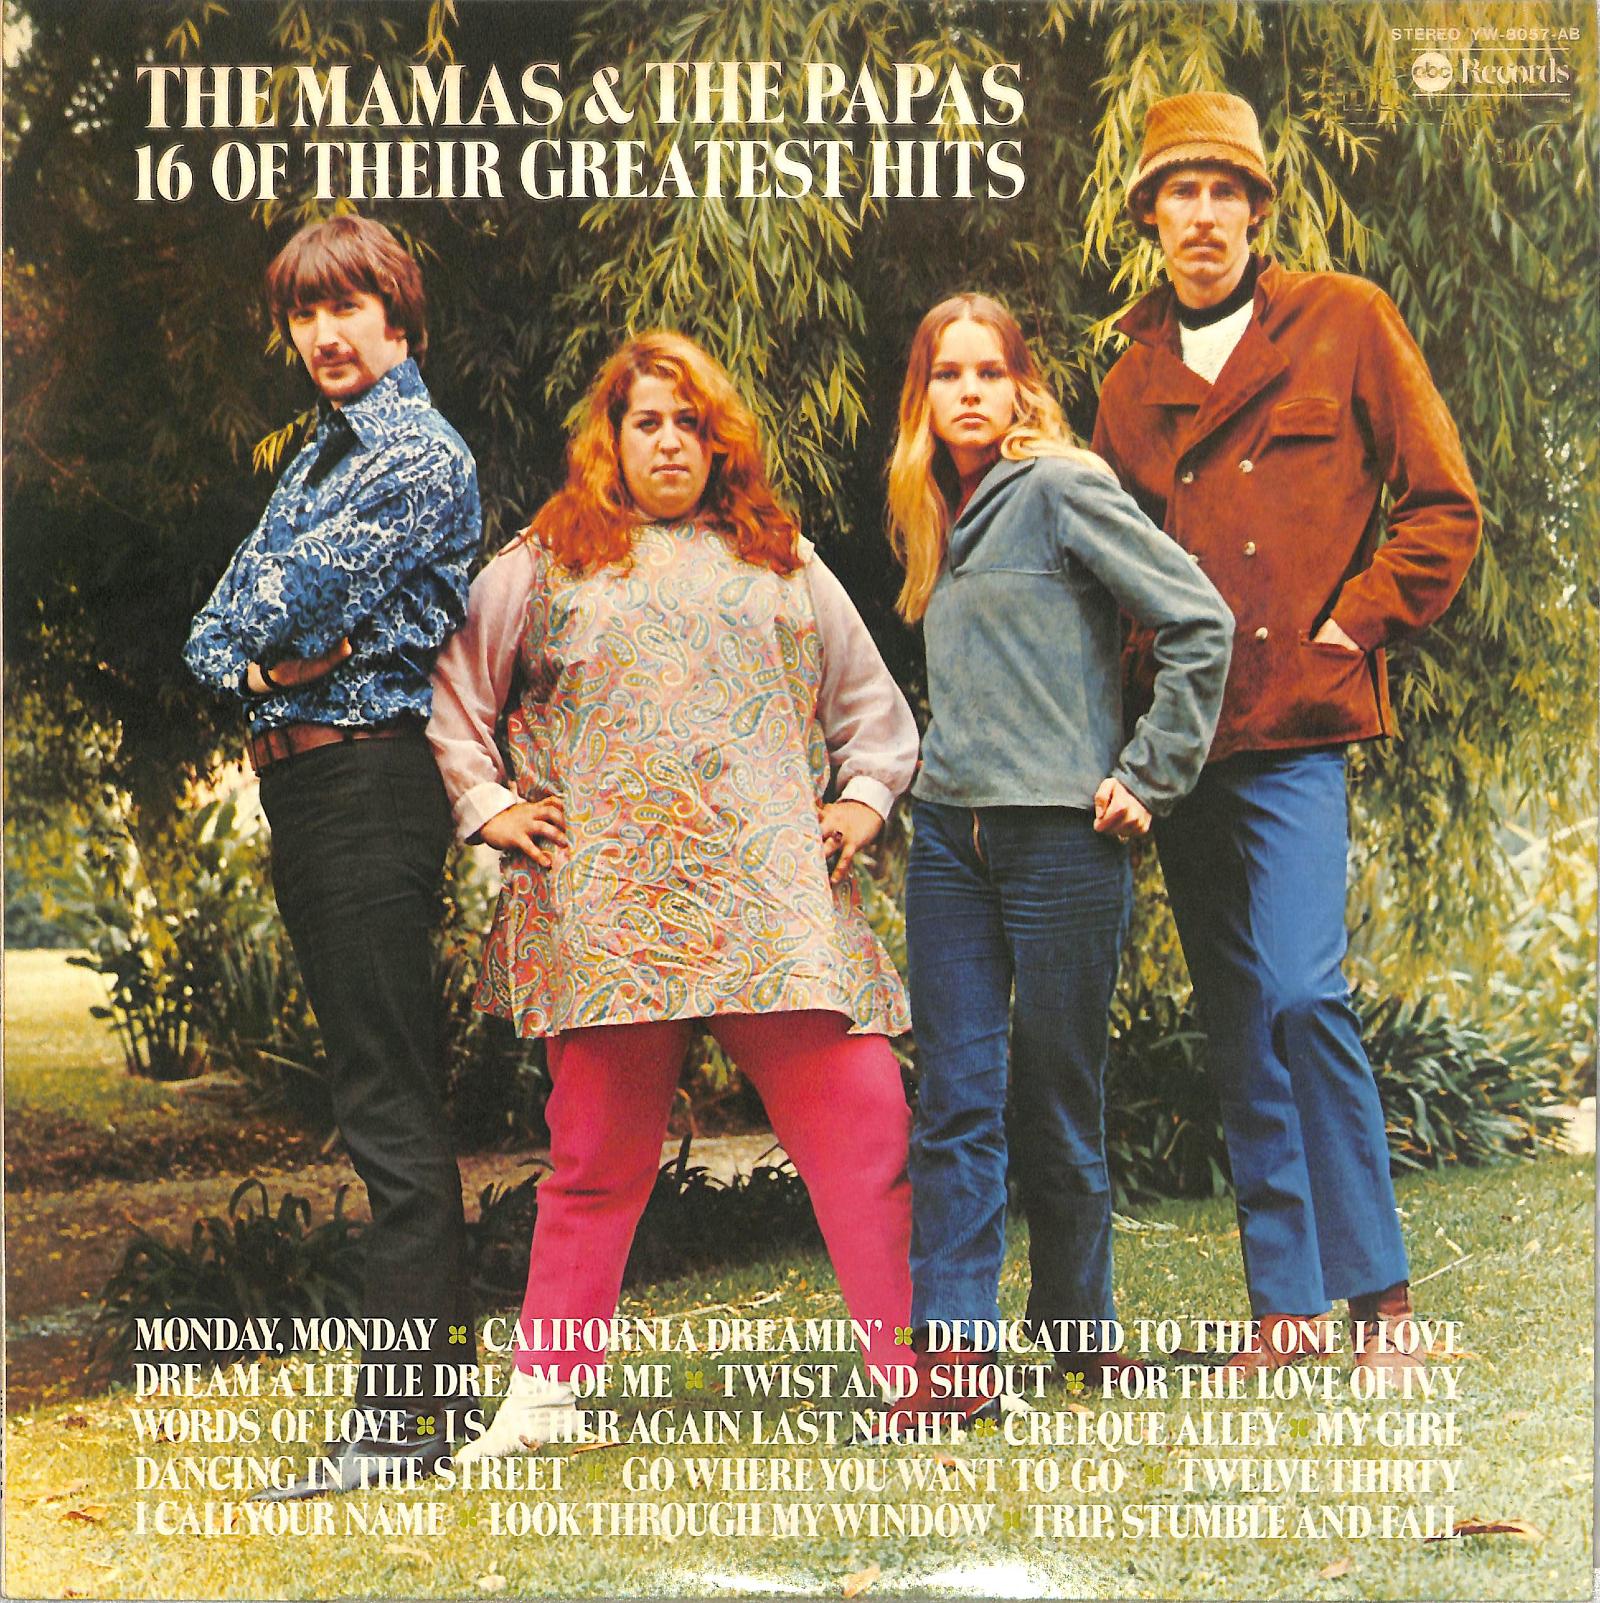 THE MAMAS & THE PAPAS - 16 Of Their Greatest Hits